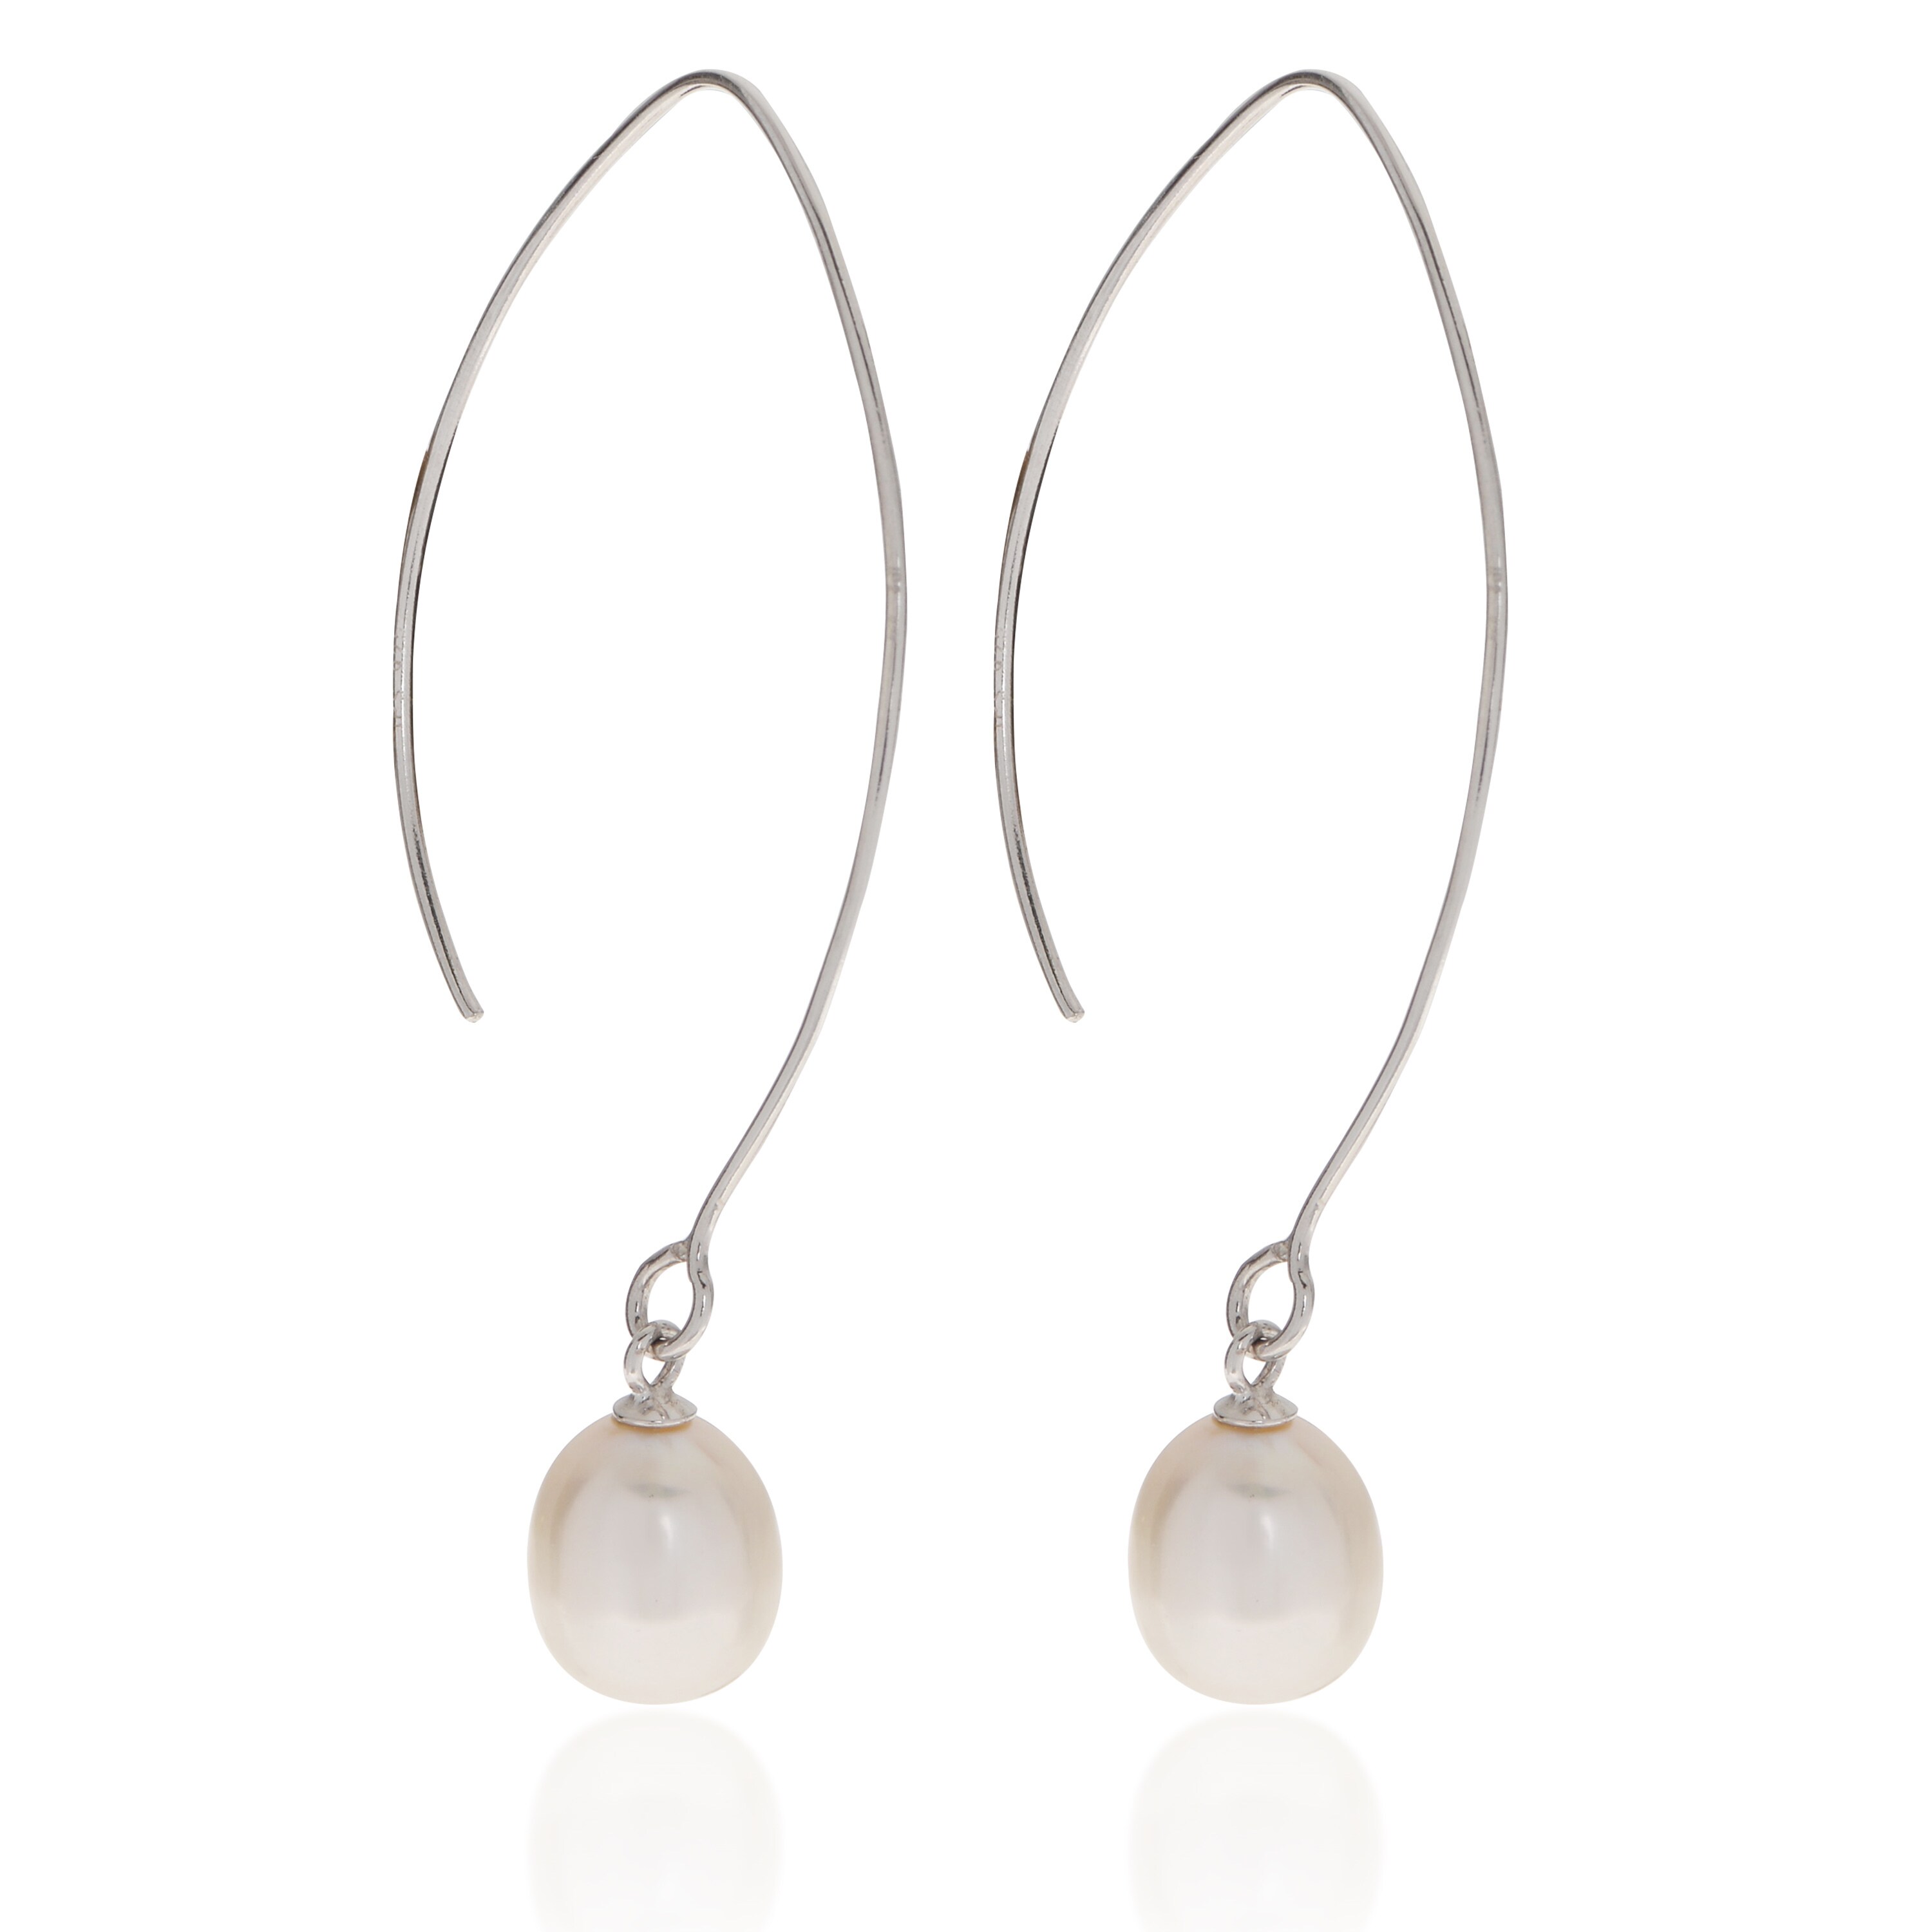 9-10mm White Natural Freshwater Flat Pearl Earrings for Women Stud Jewelry e245